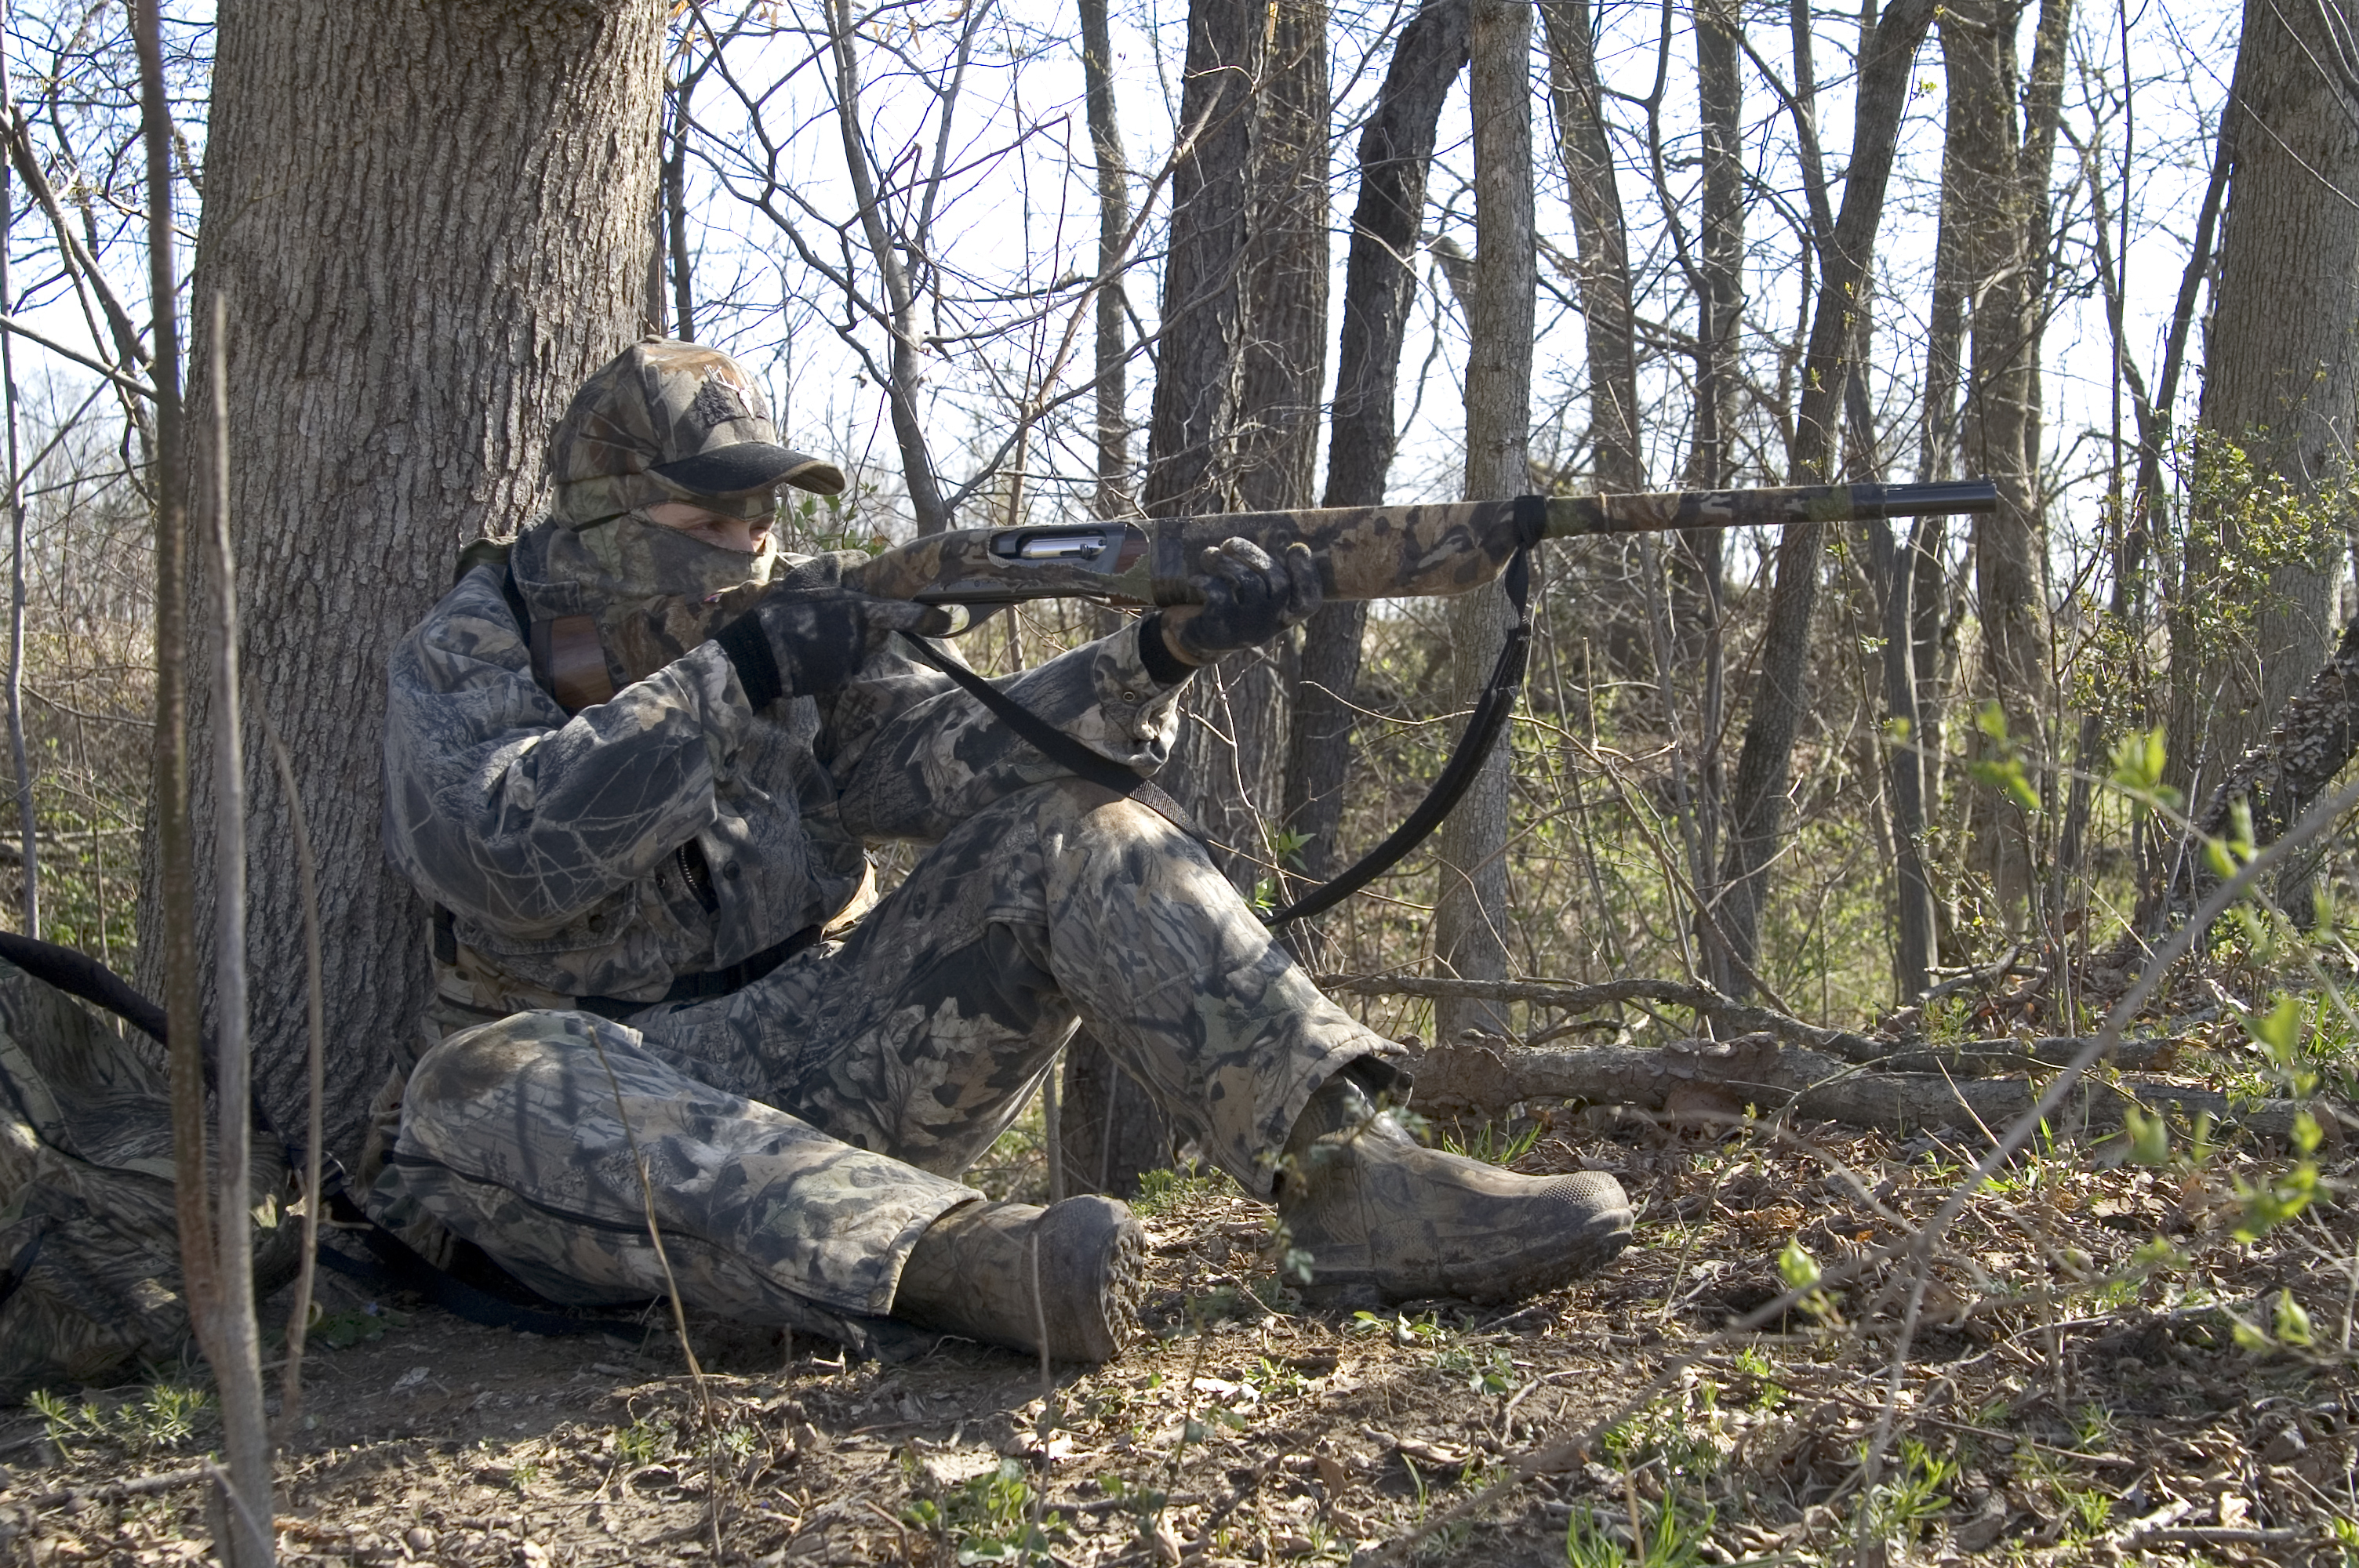 A hunter aiming a firearm, how to carry a hunting rifle safely. 